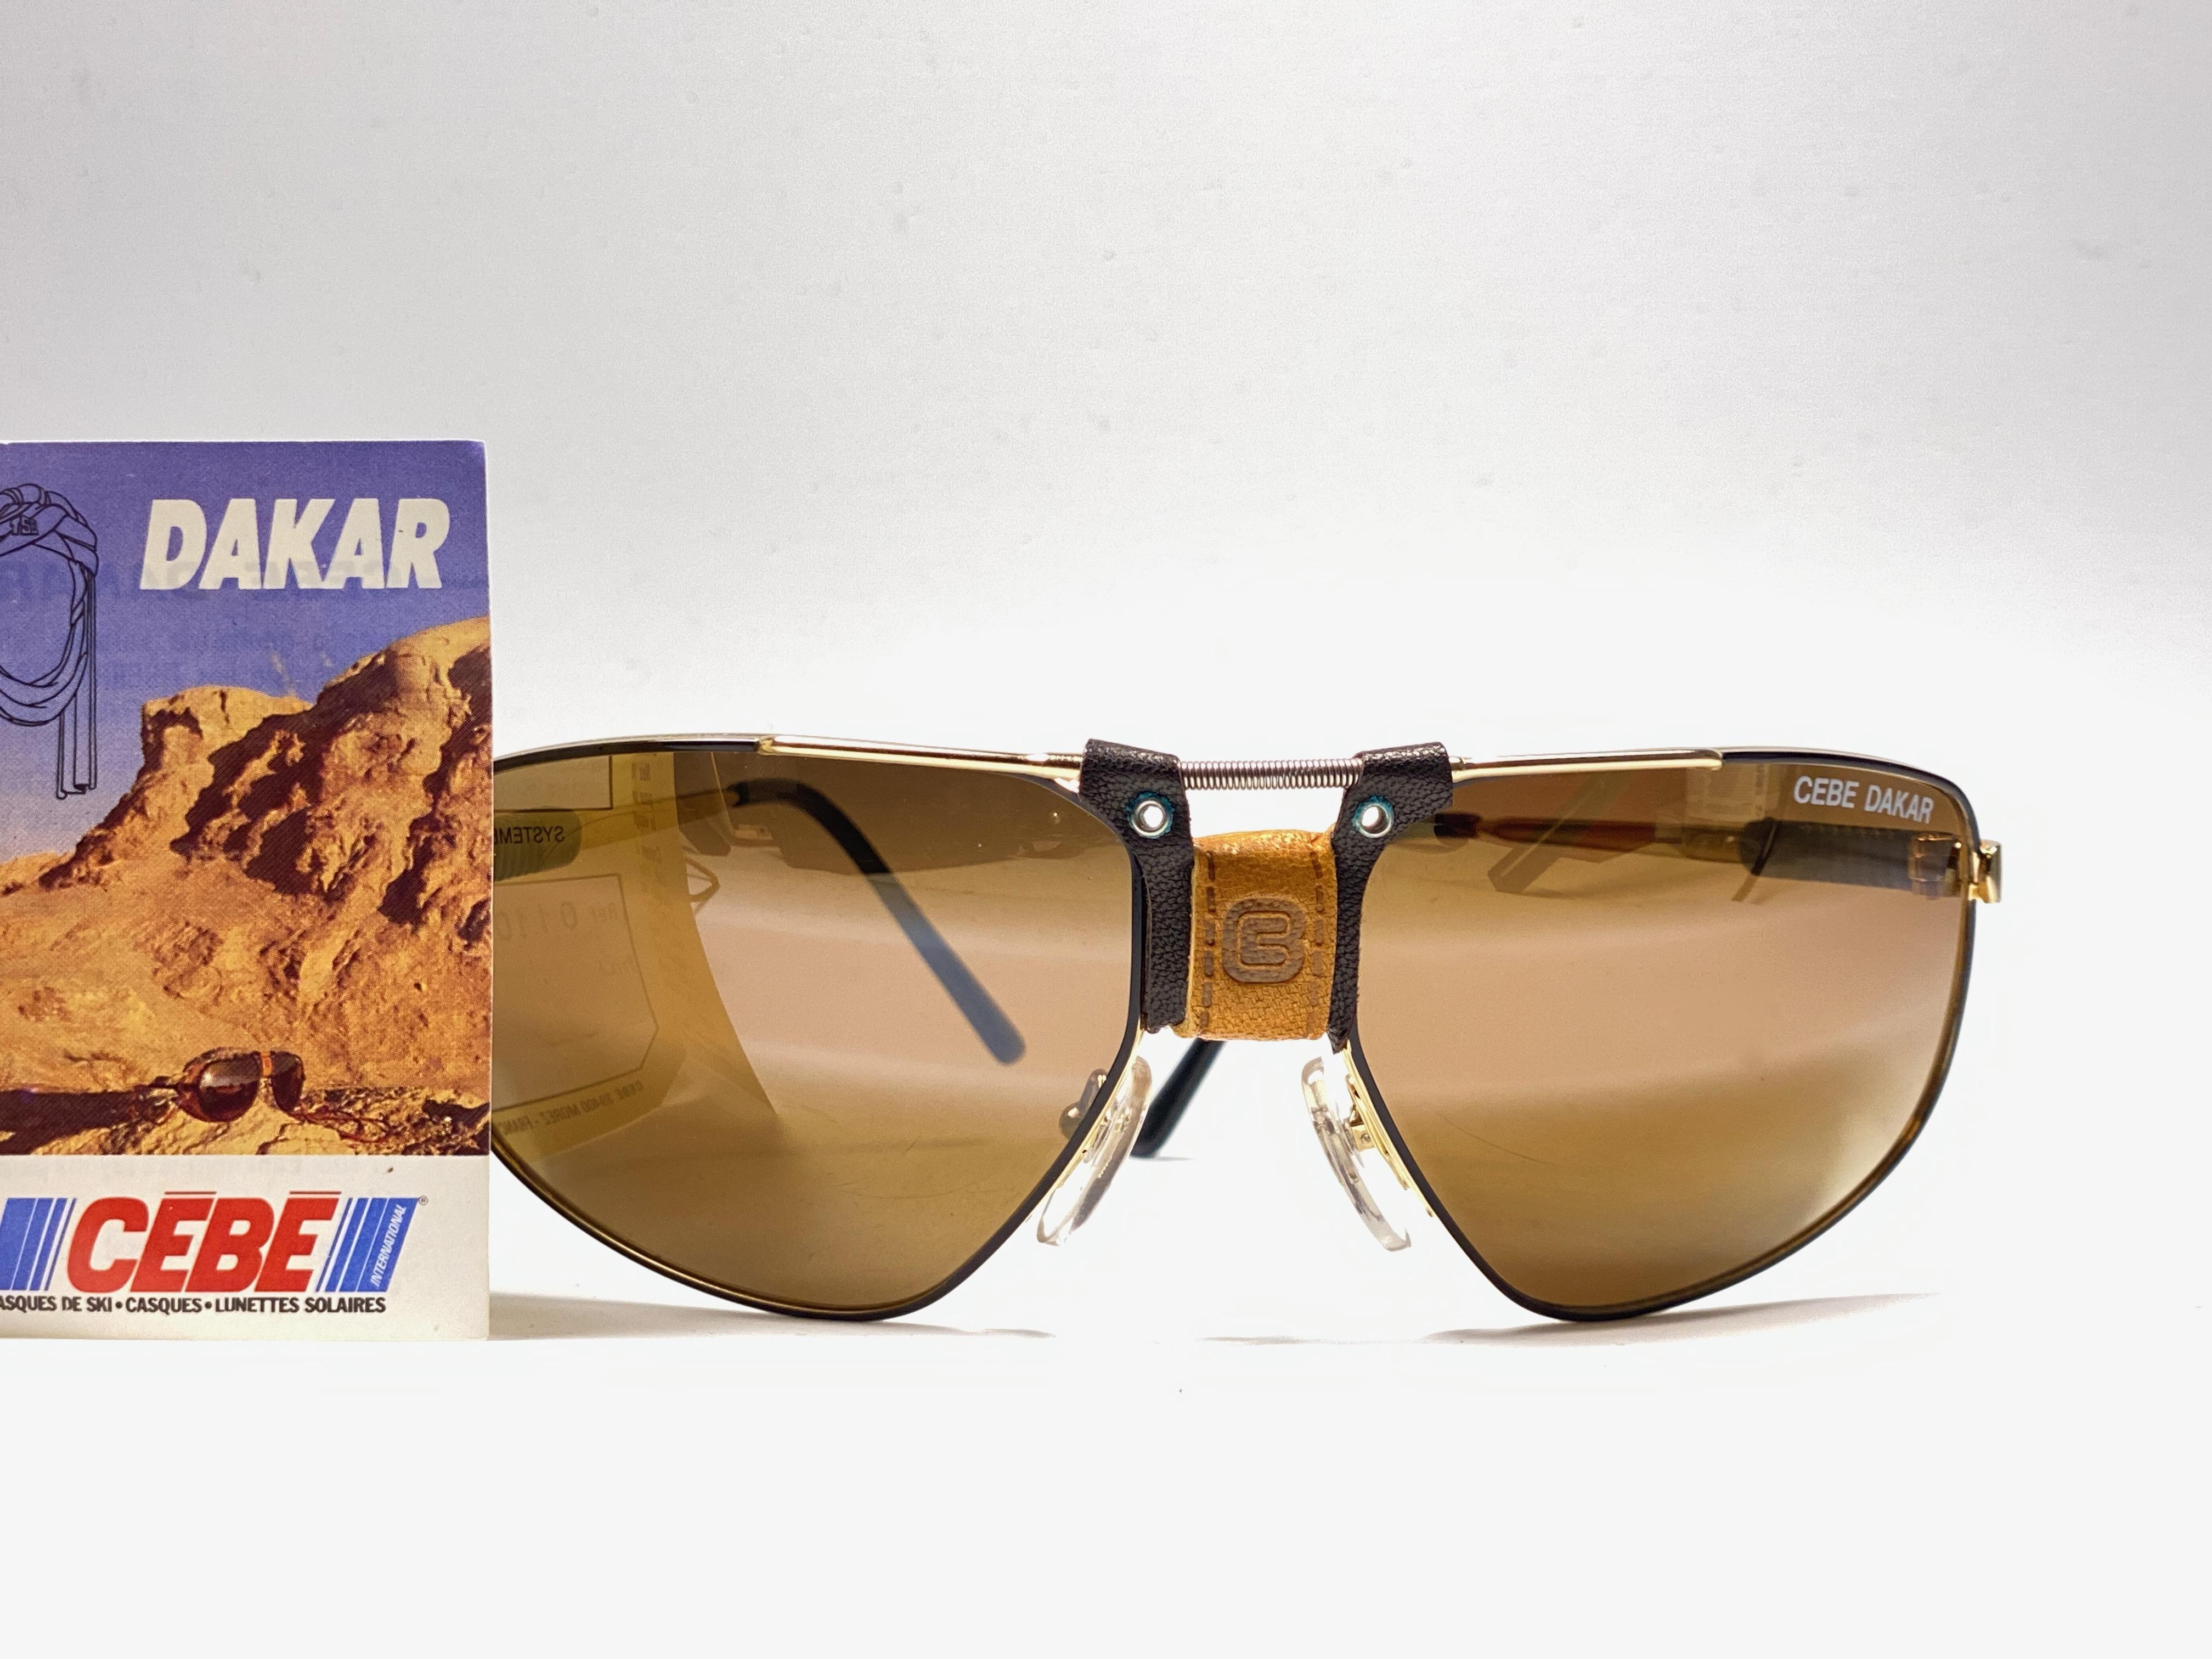 New Vintage Cebe Dakar gold awith leather accents on nose bridge and removable cord sunglasses. From the very same series as the ones worn by the great Miles Davis.

Sturdy and cool frame sporting a pair of gold lenses. 

Never worn or displayed.